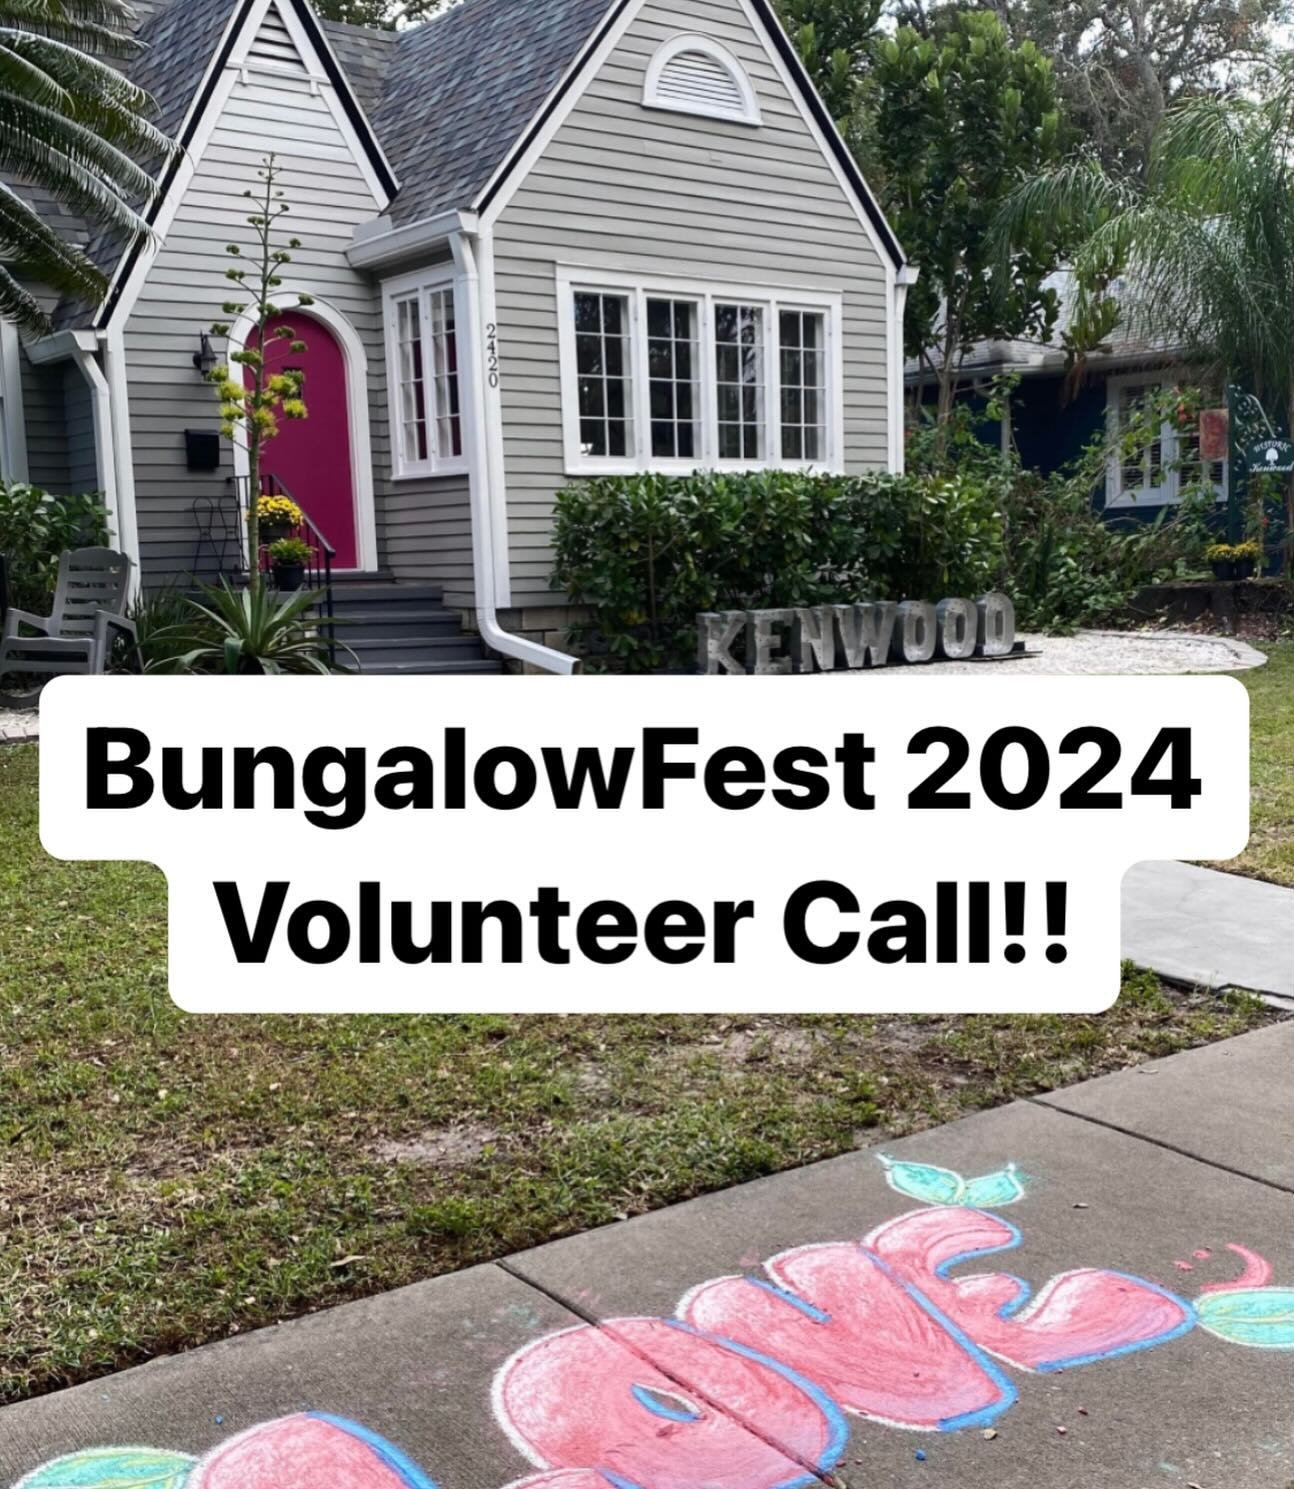 Hey Neighbors!

Get ready to make a difference in our community! BungalowFest, our beloved neighborhood fundraising event, is gearing up for another amazing year, and we need your help to make it a success.

If you&rsquo;re passionate about Historic 